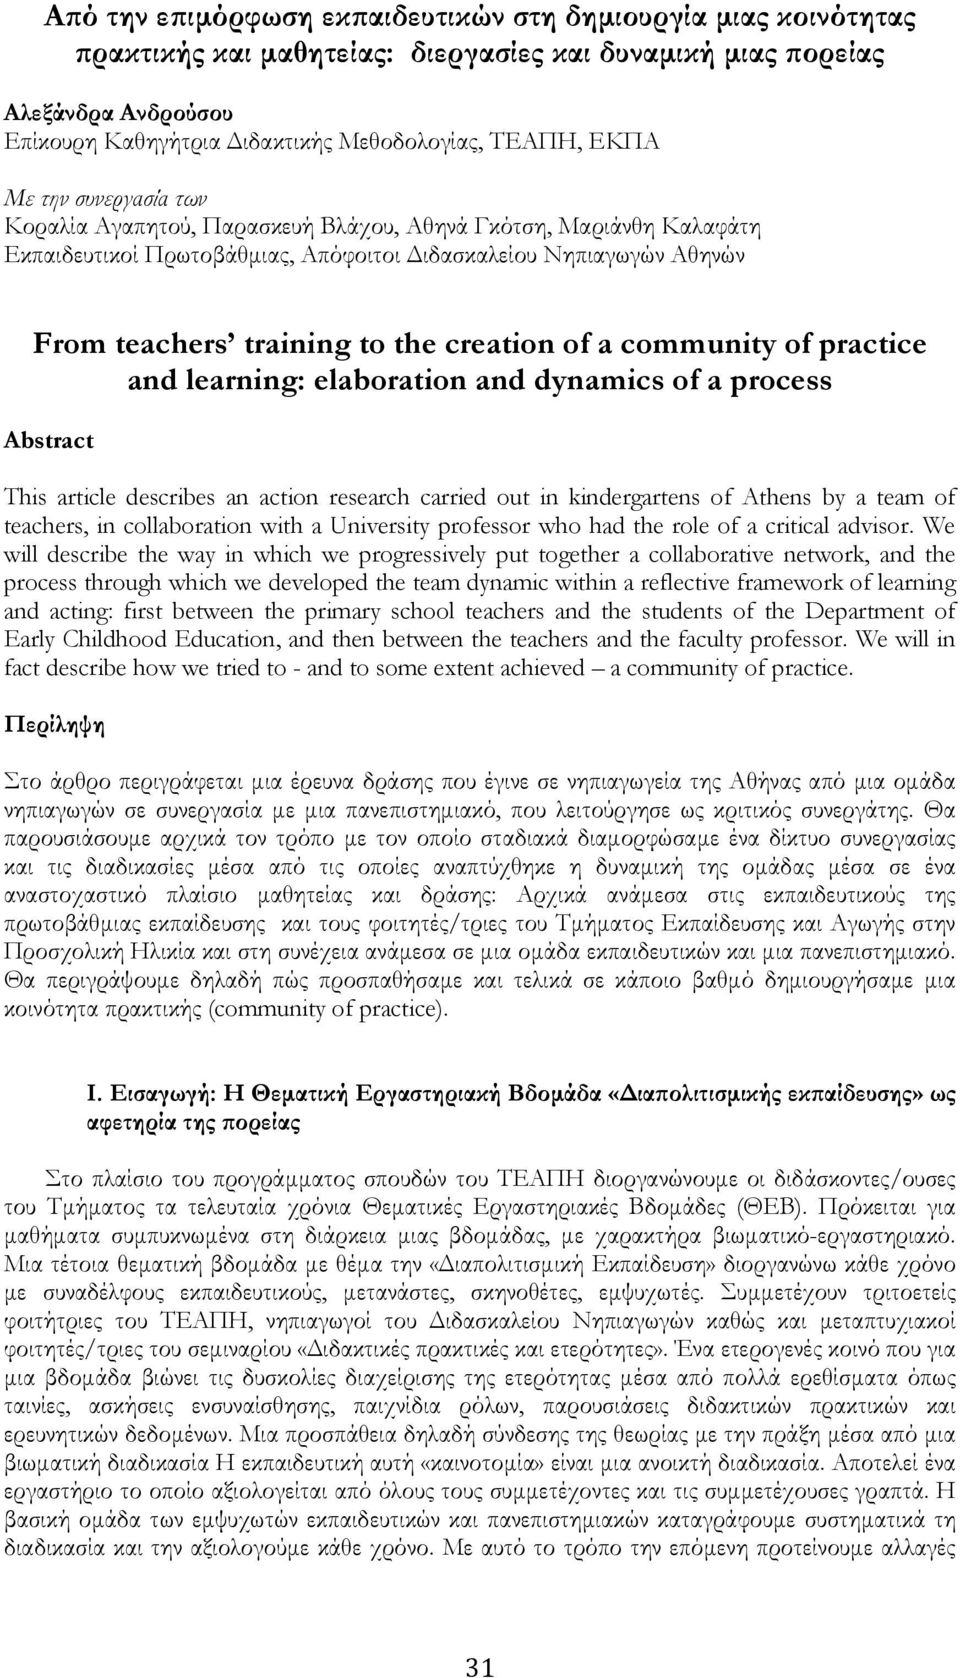 creation of a community of practice and learning: elaboration and dynamics of a process Abstract This article describes an action research carried out in kindergartens of Athens by a team of